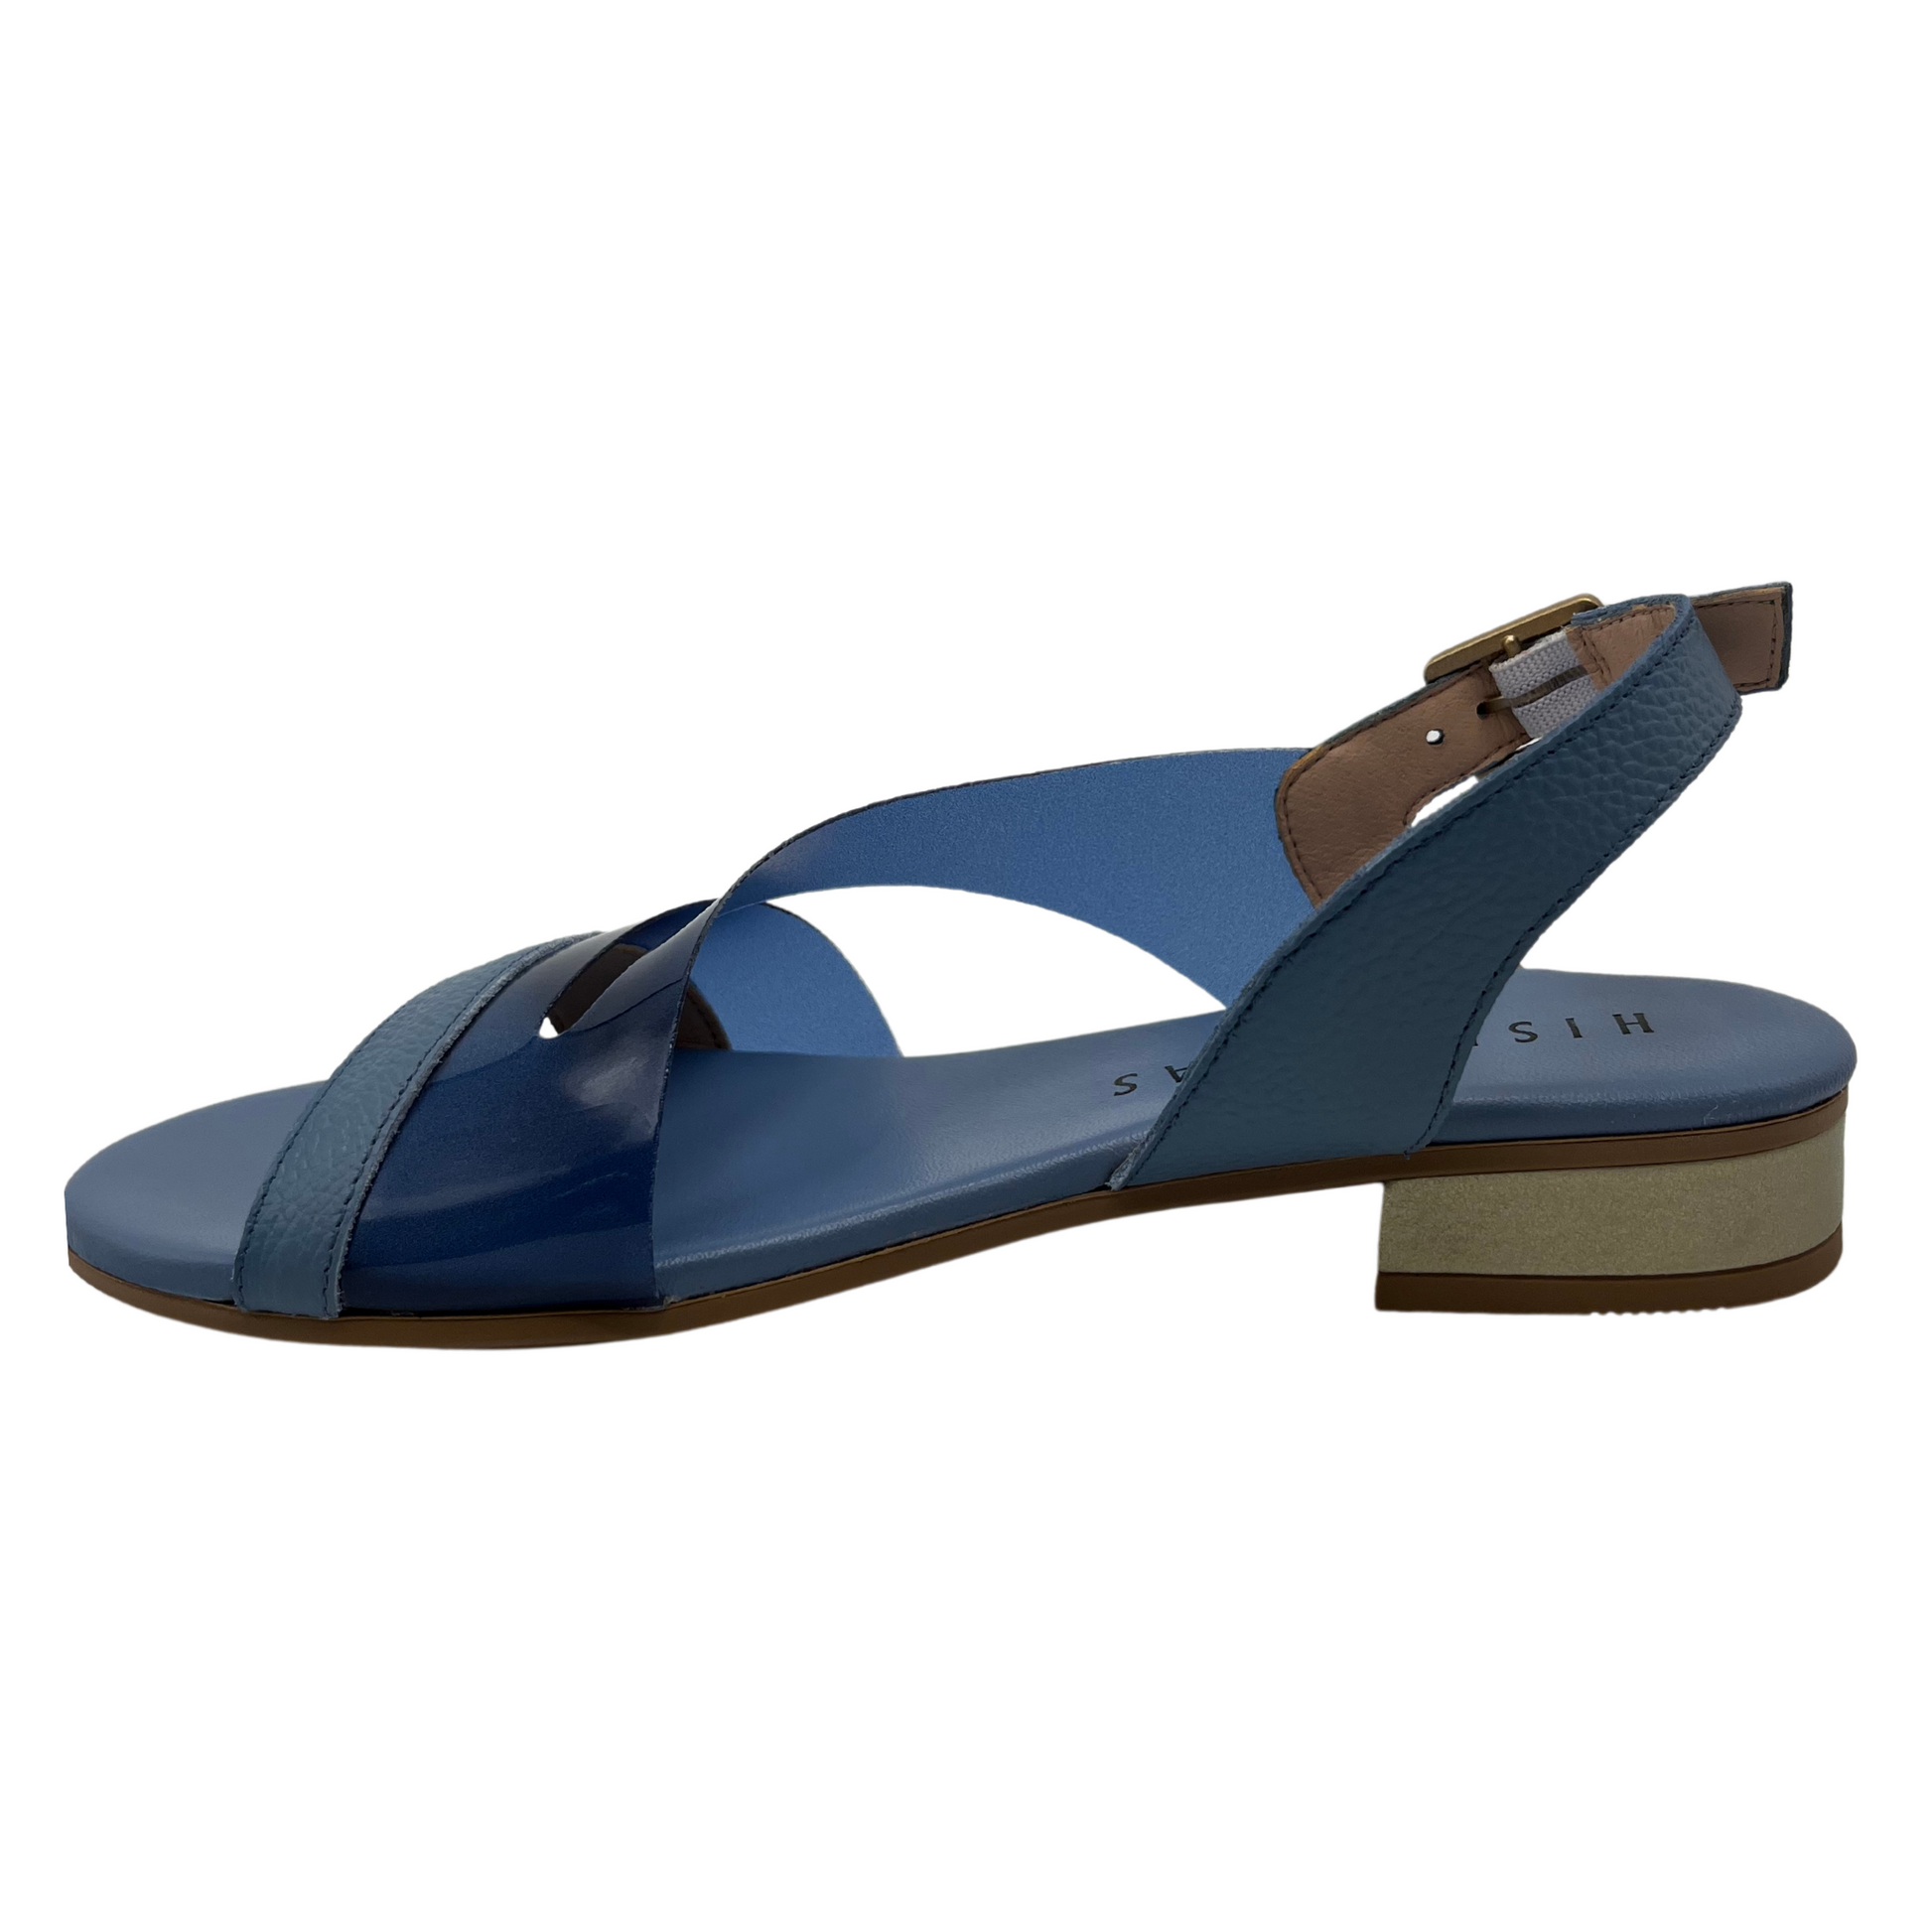 Left facing view of blue leather and vinyl sandal with buckle strap and low heel